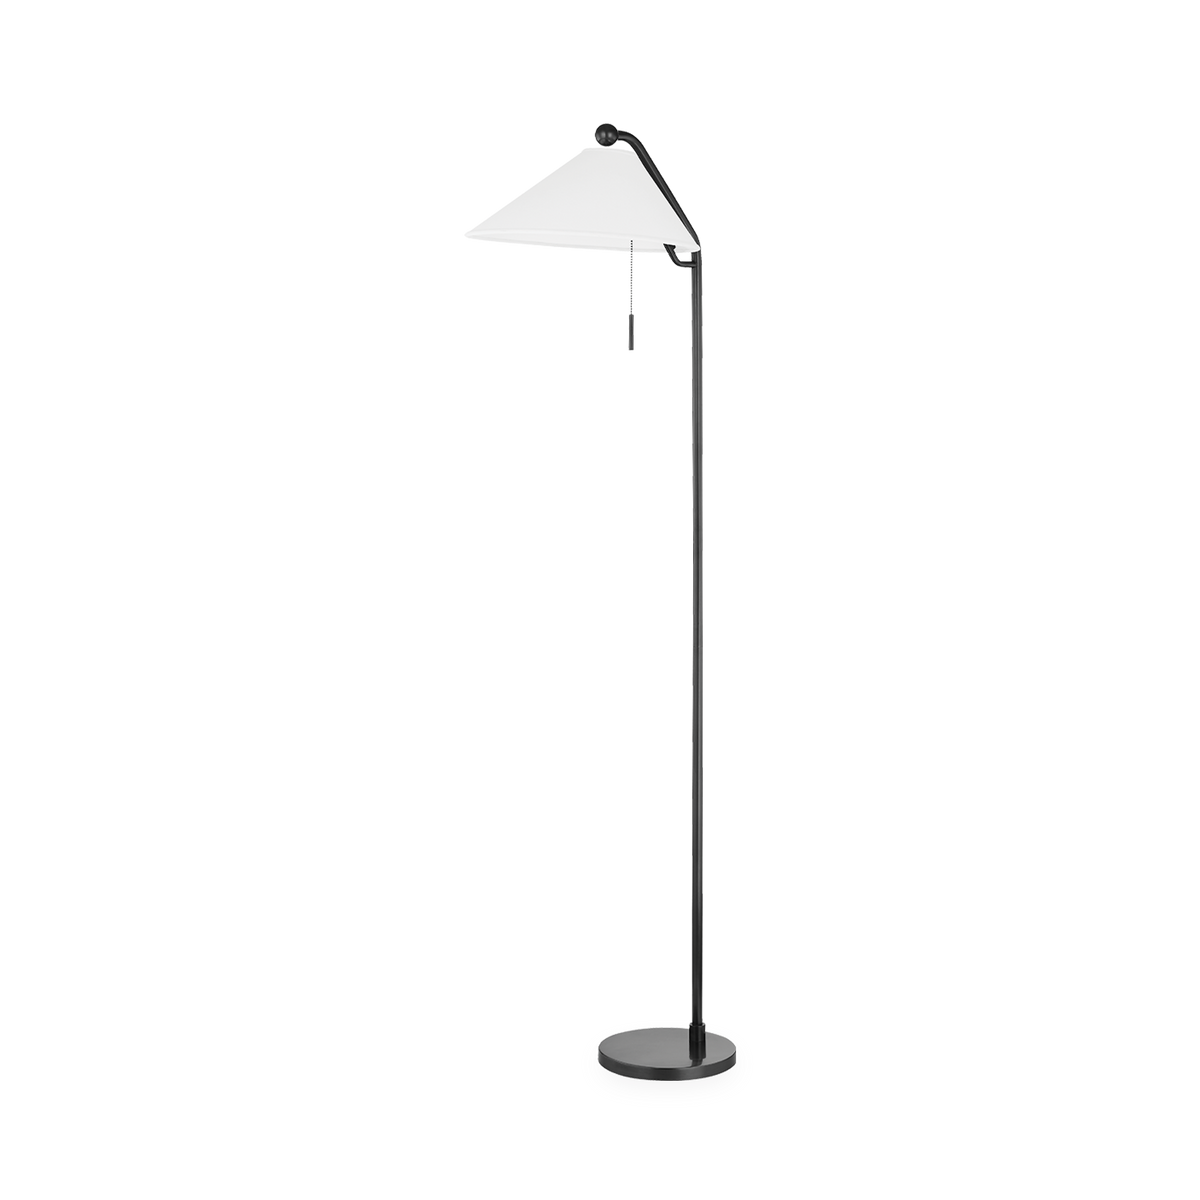 The Aisa Floop Lamp is a classic mid-century style lamp made modern.